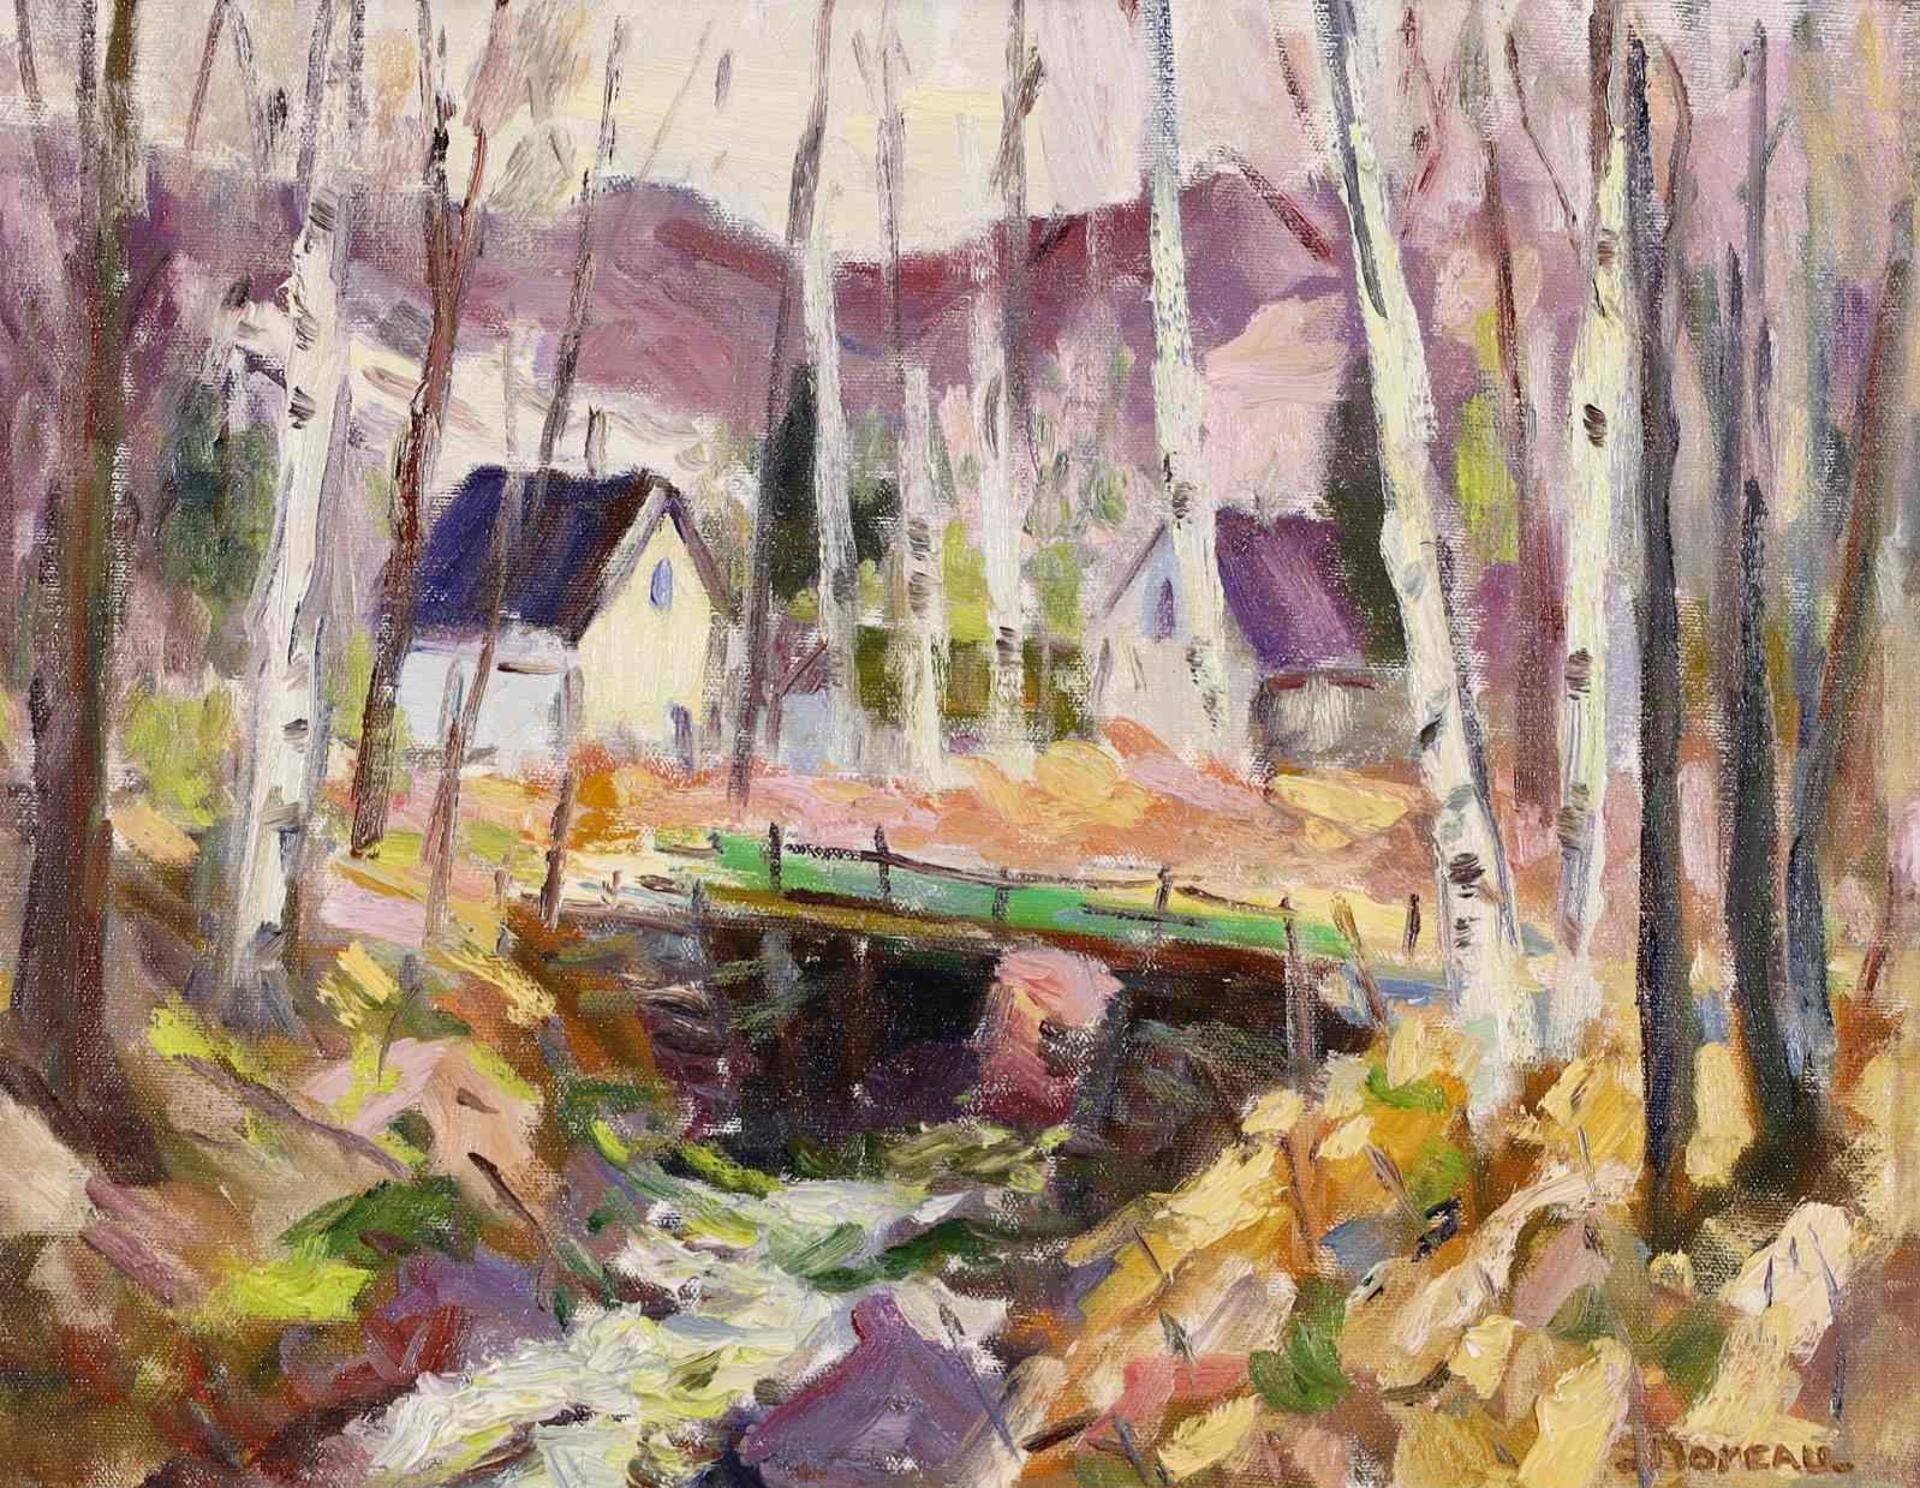 Francine Noreau (1941-2020) - Cabins In The Woods